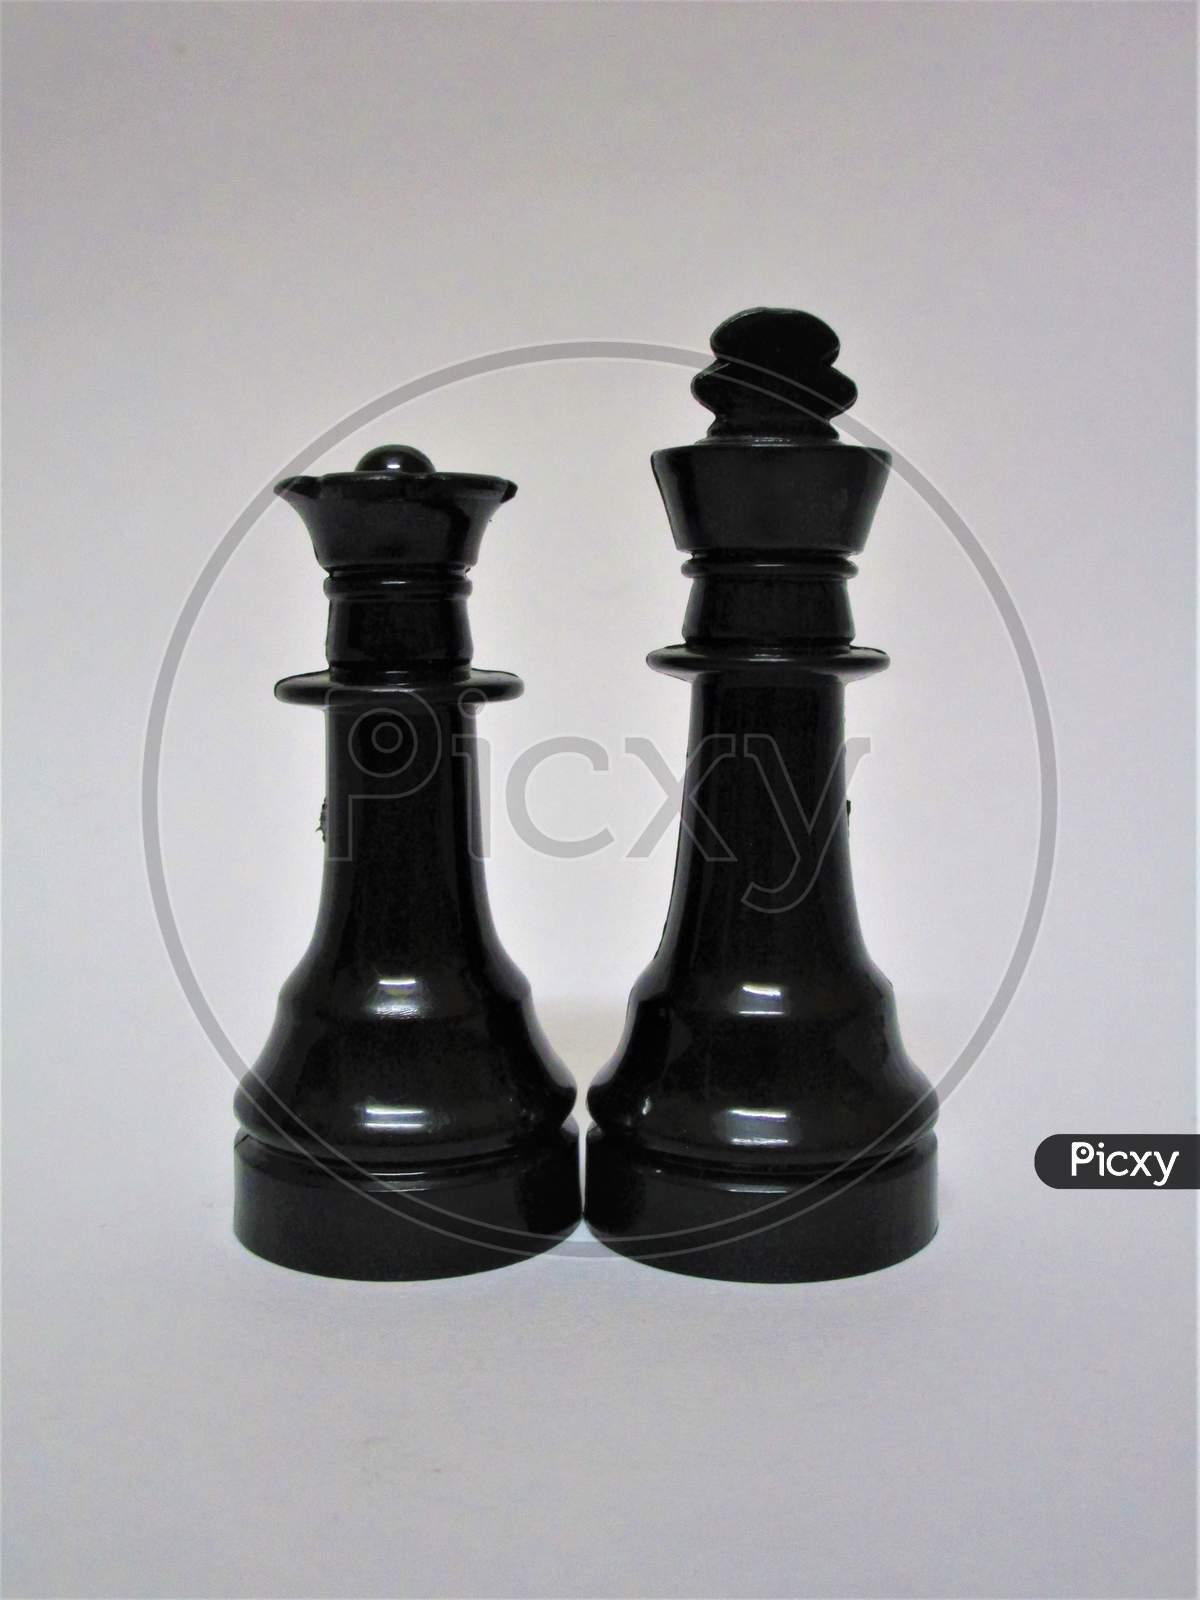 Chess pieces queen and king together on a white background.